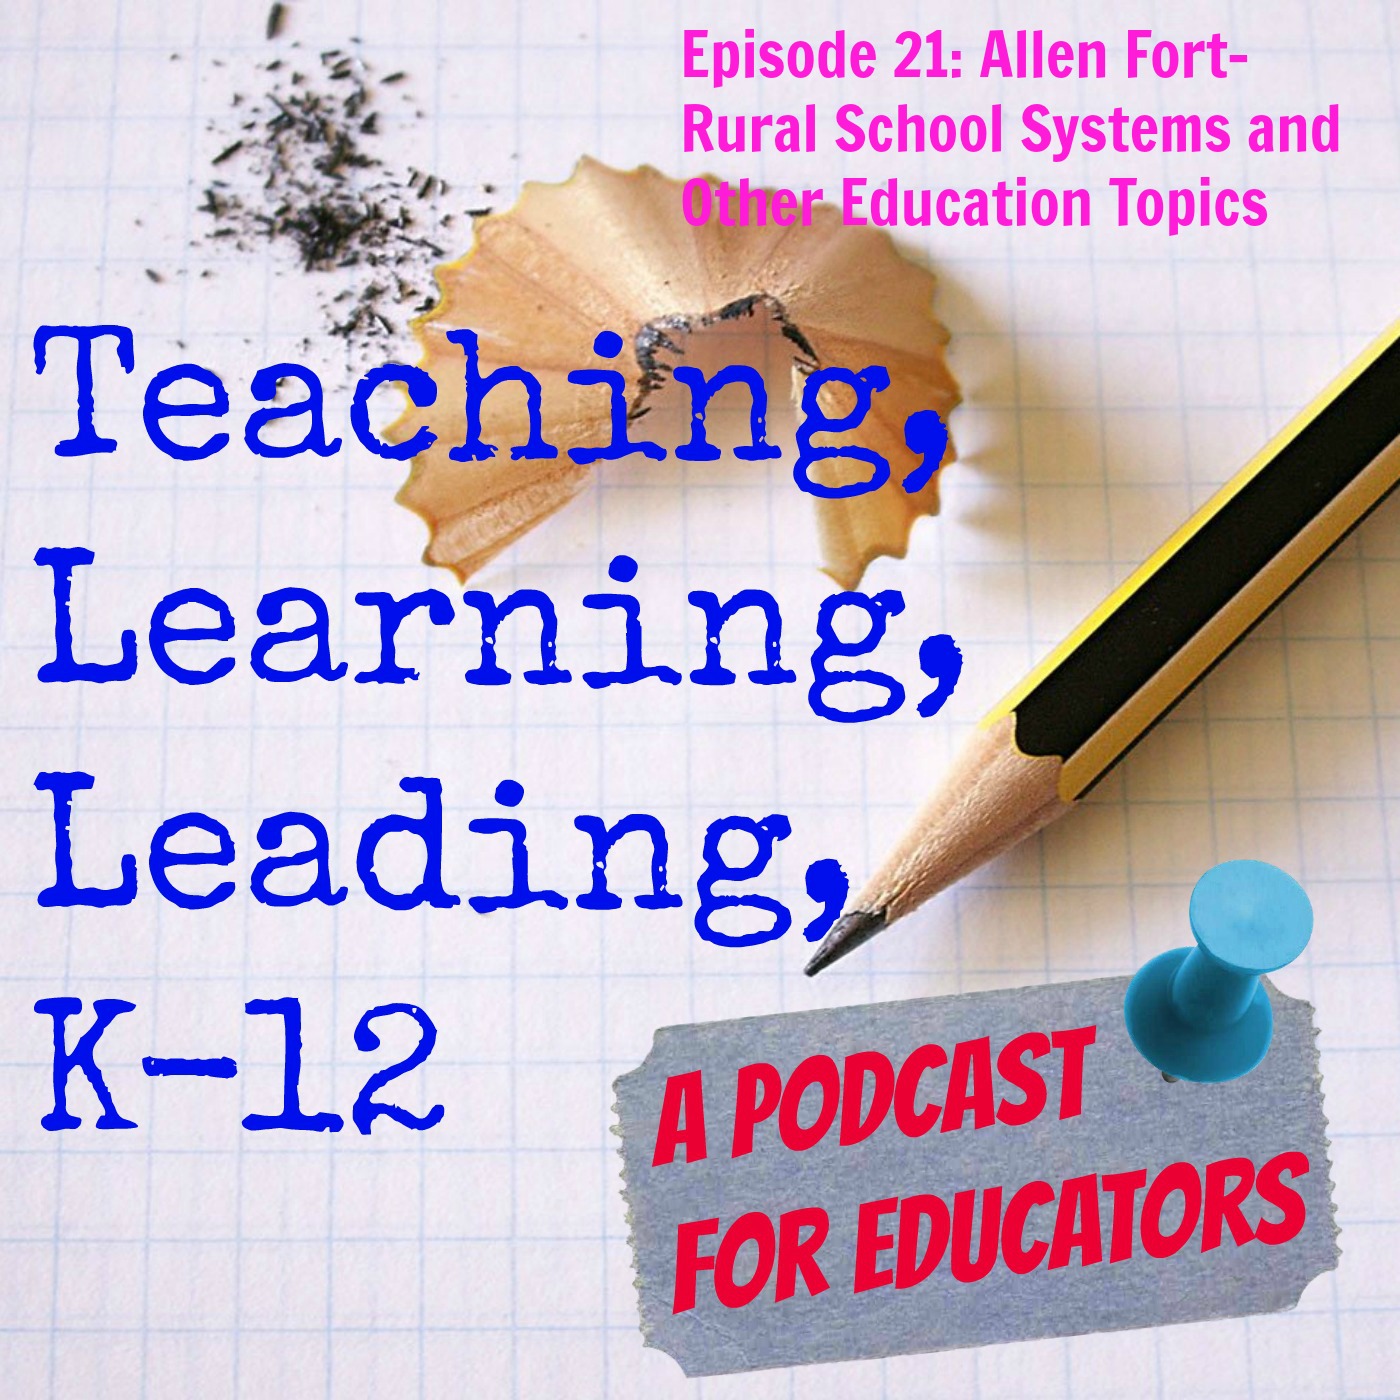 Episode 21: Allen Fort -Talking about Rural School Systems and other Education Topics in Georgia